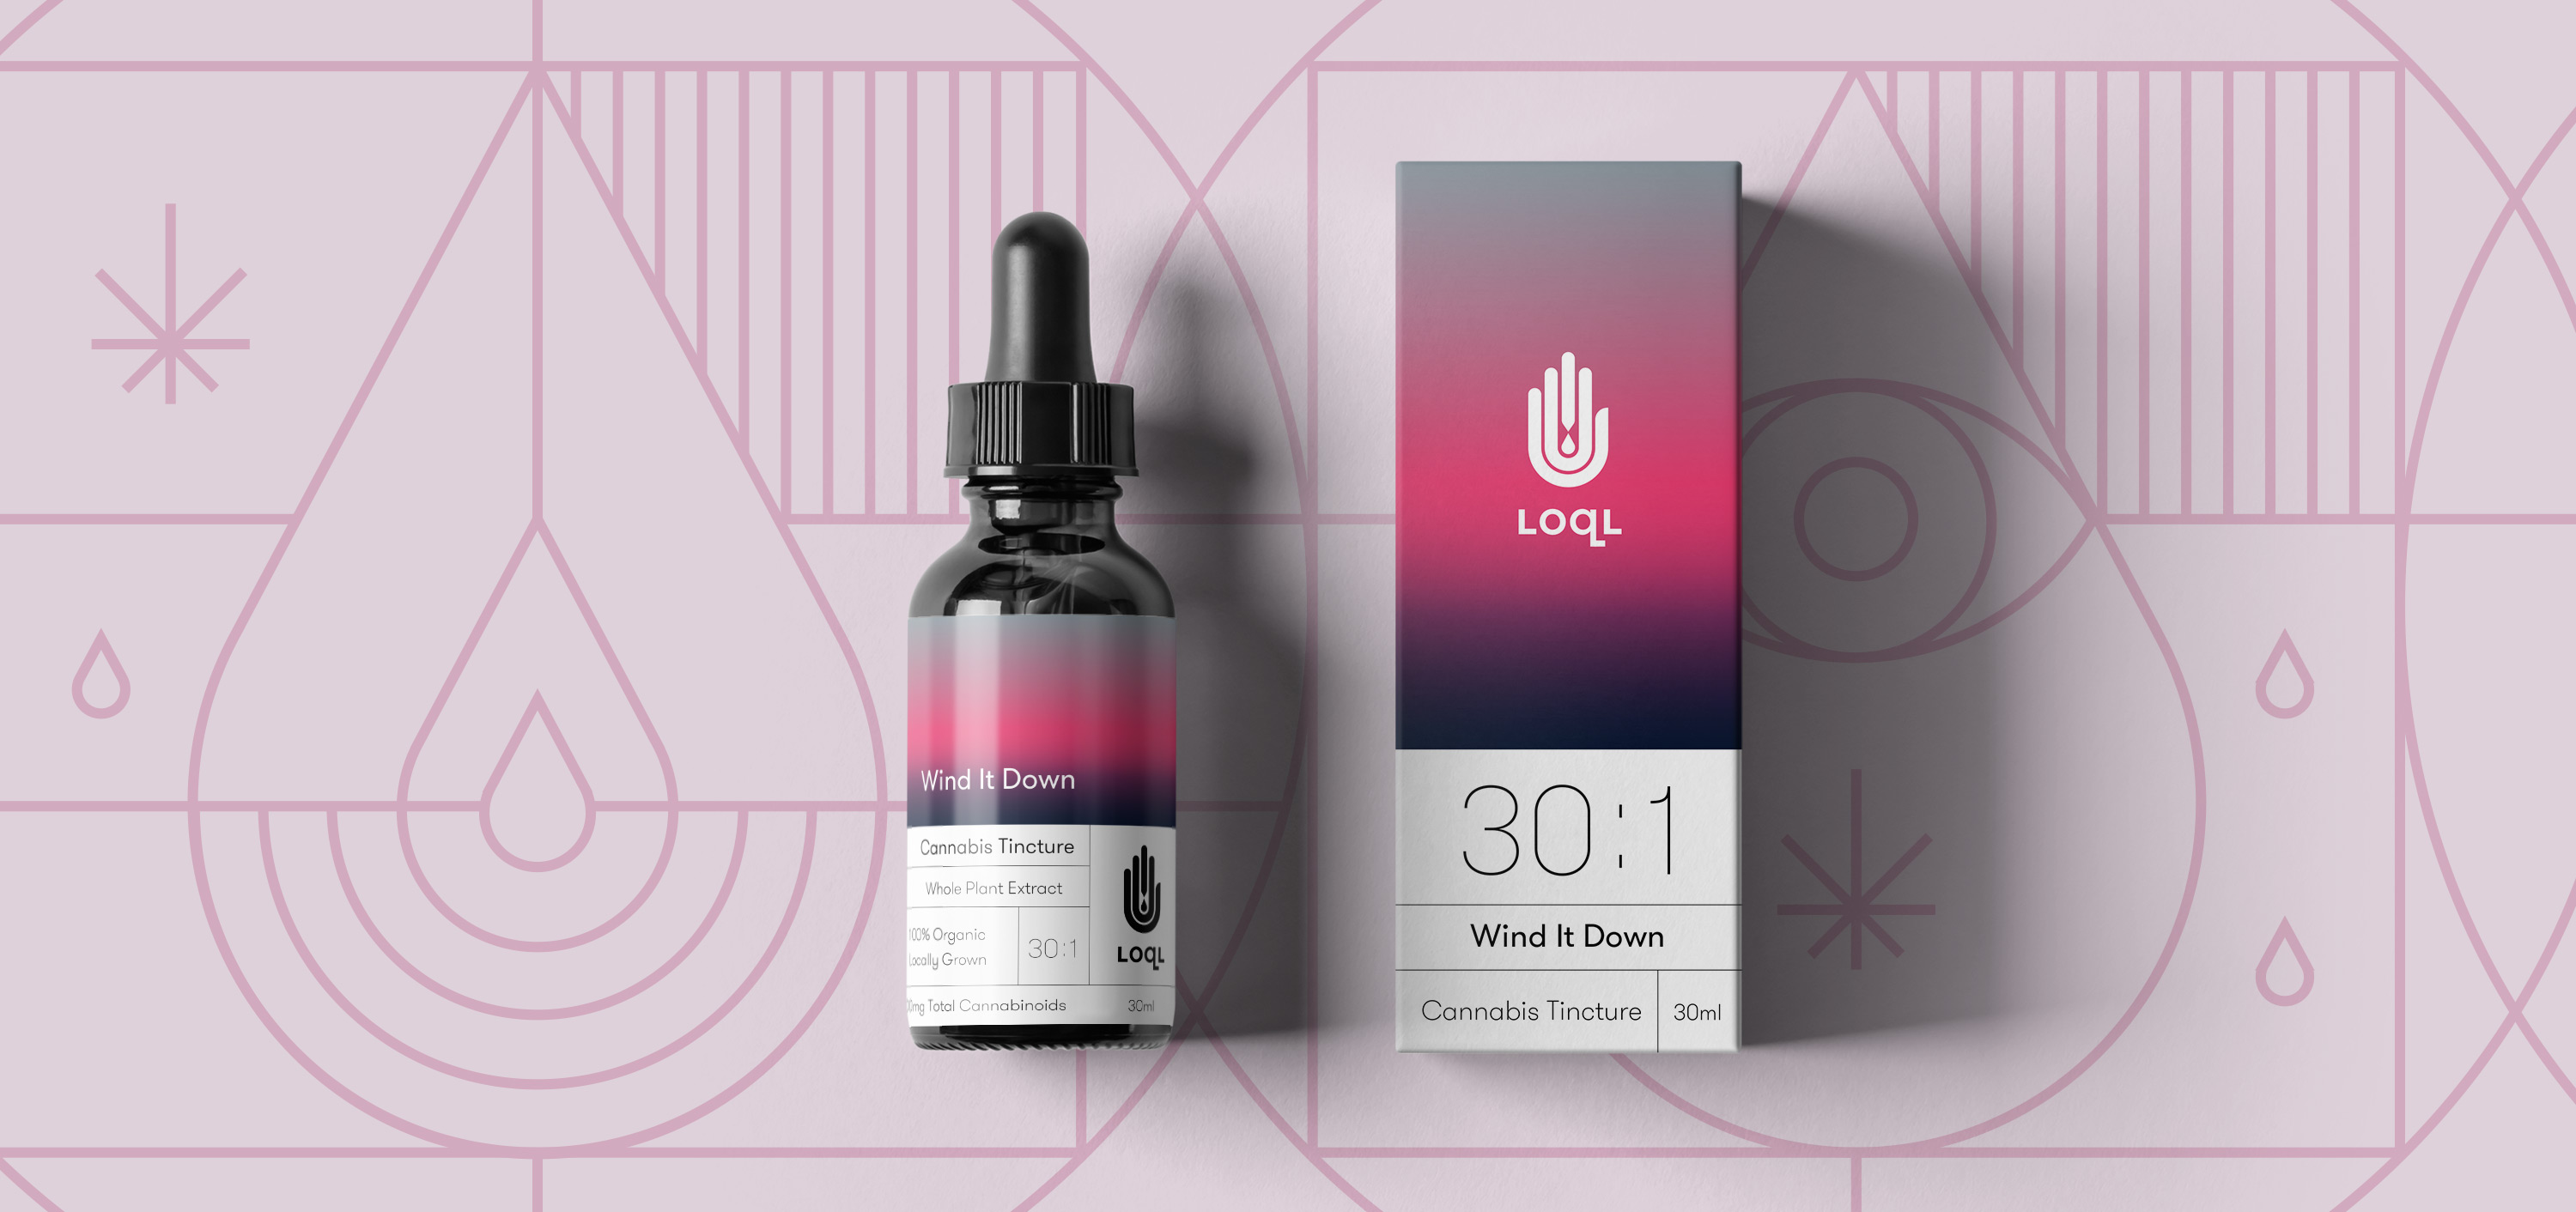 LOQL cannabis concentrates brand identity and packaging by TRÜF.